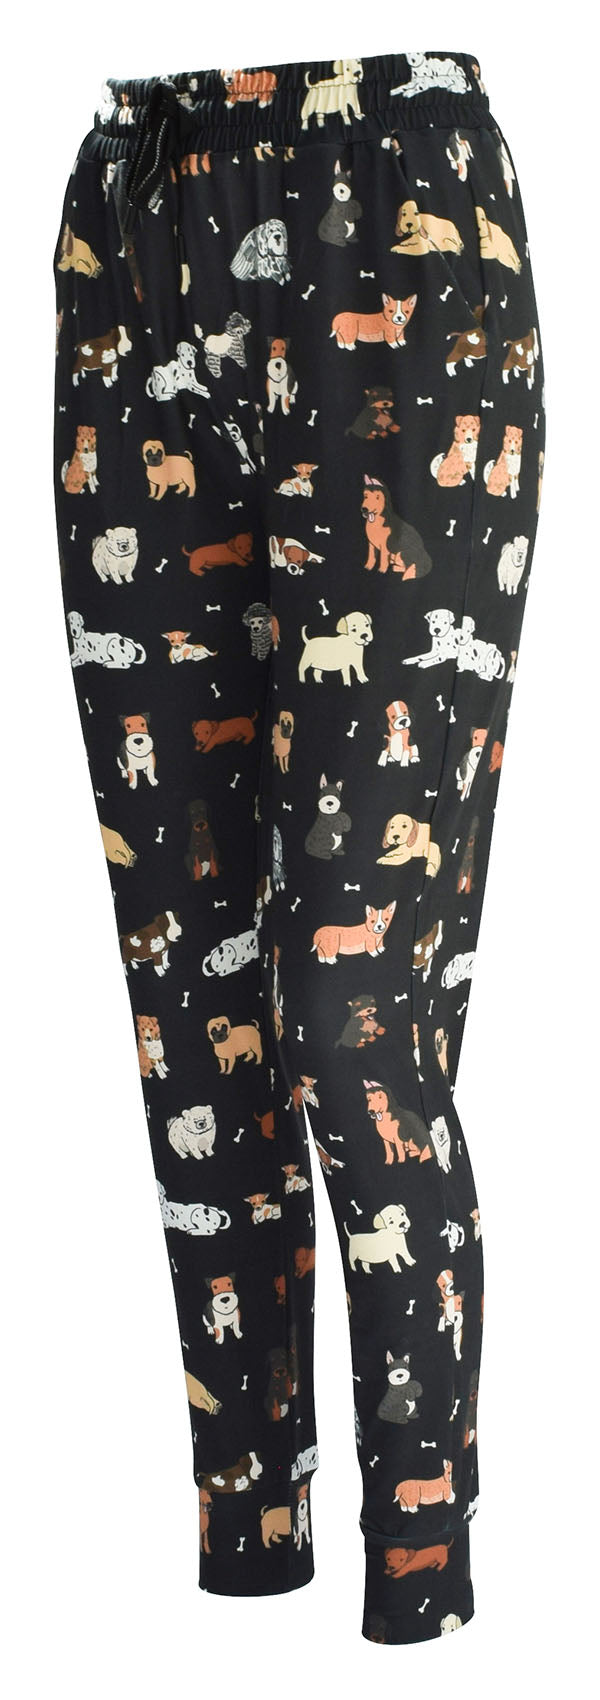 Doggy Daydream Lejoggers-Joggers